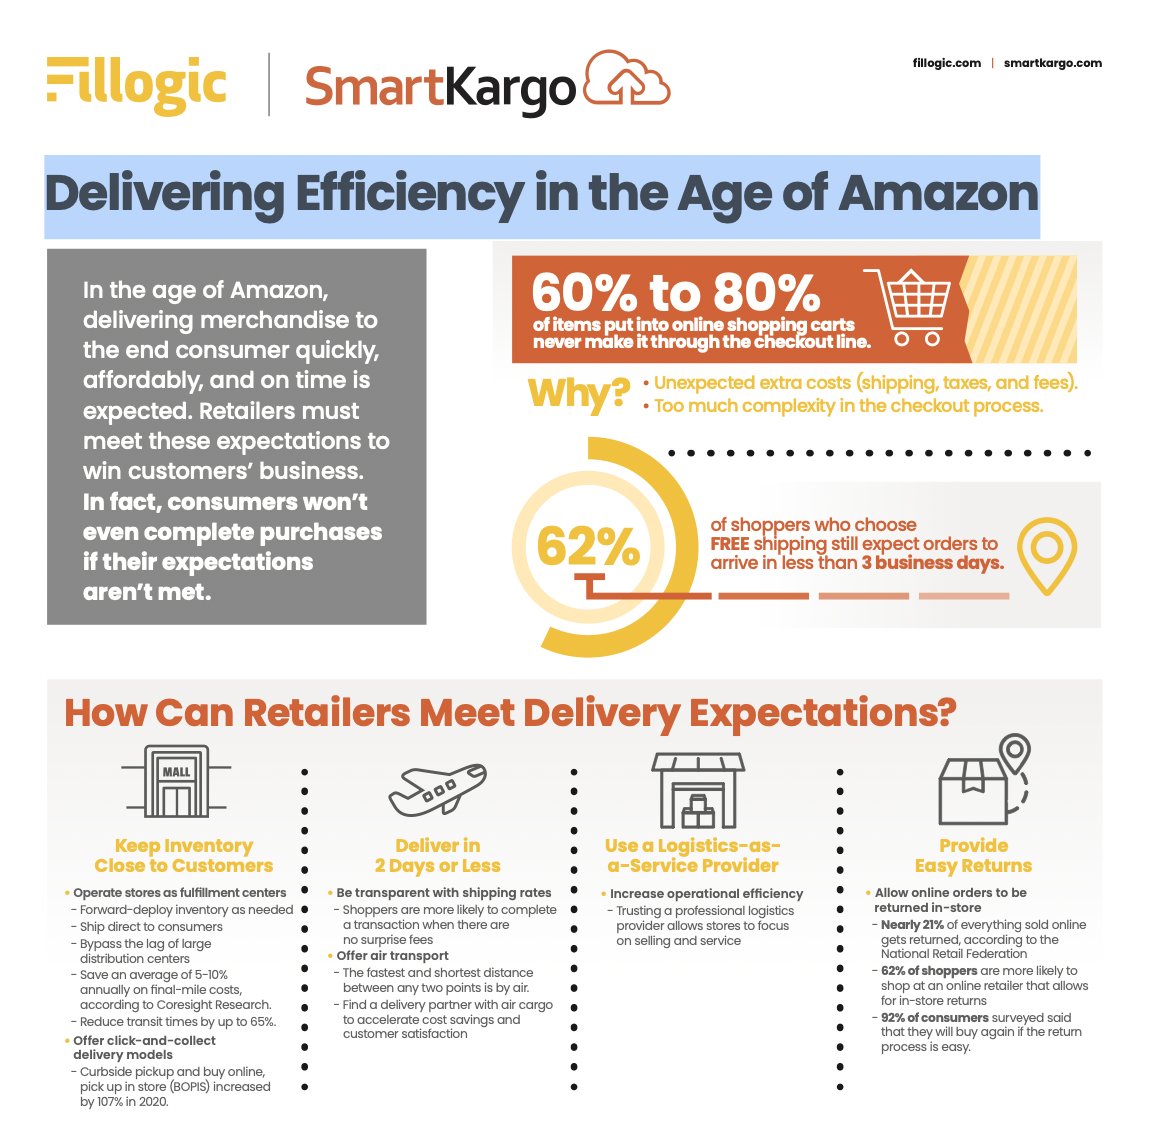 Delivering Efficiency in the Age of Amazon infographic